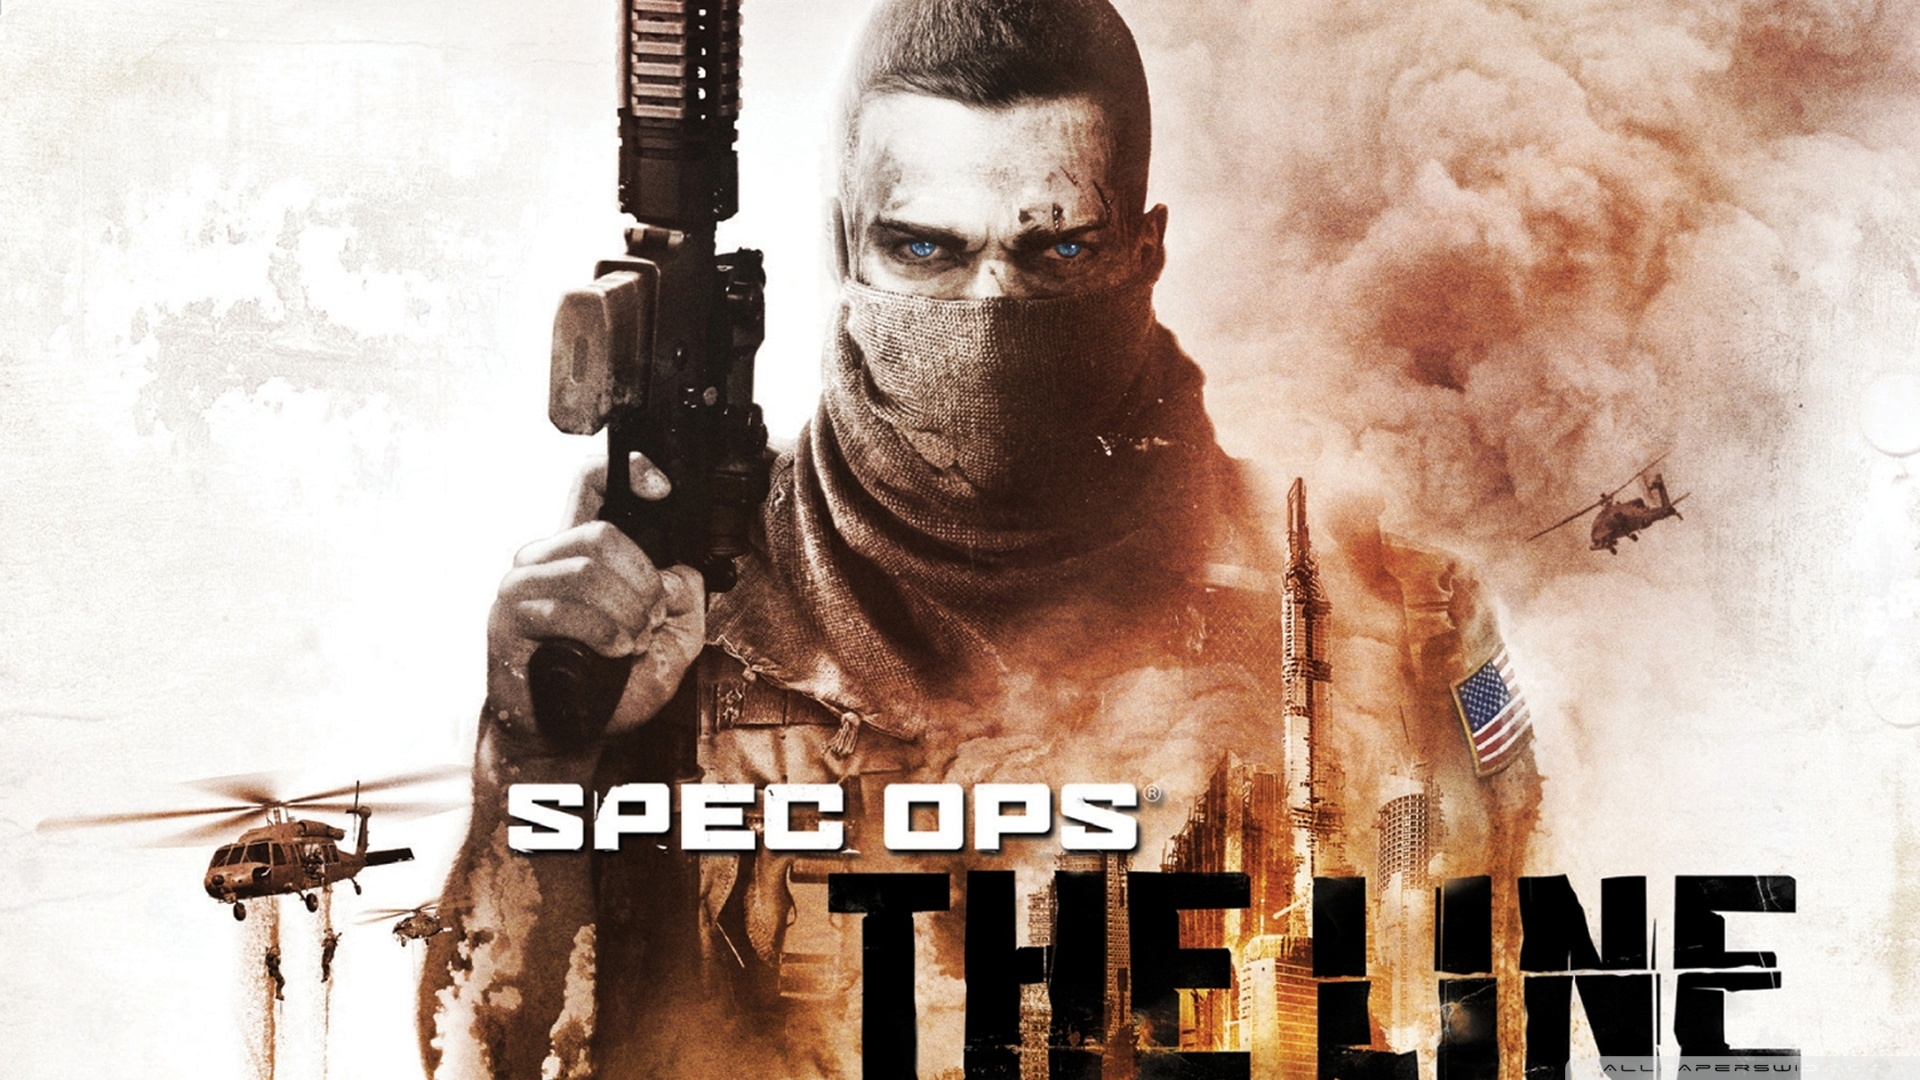 10 Best Spec Ops The Line Wallpaper FULL HD 1080p For PC Background